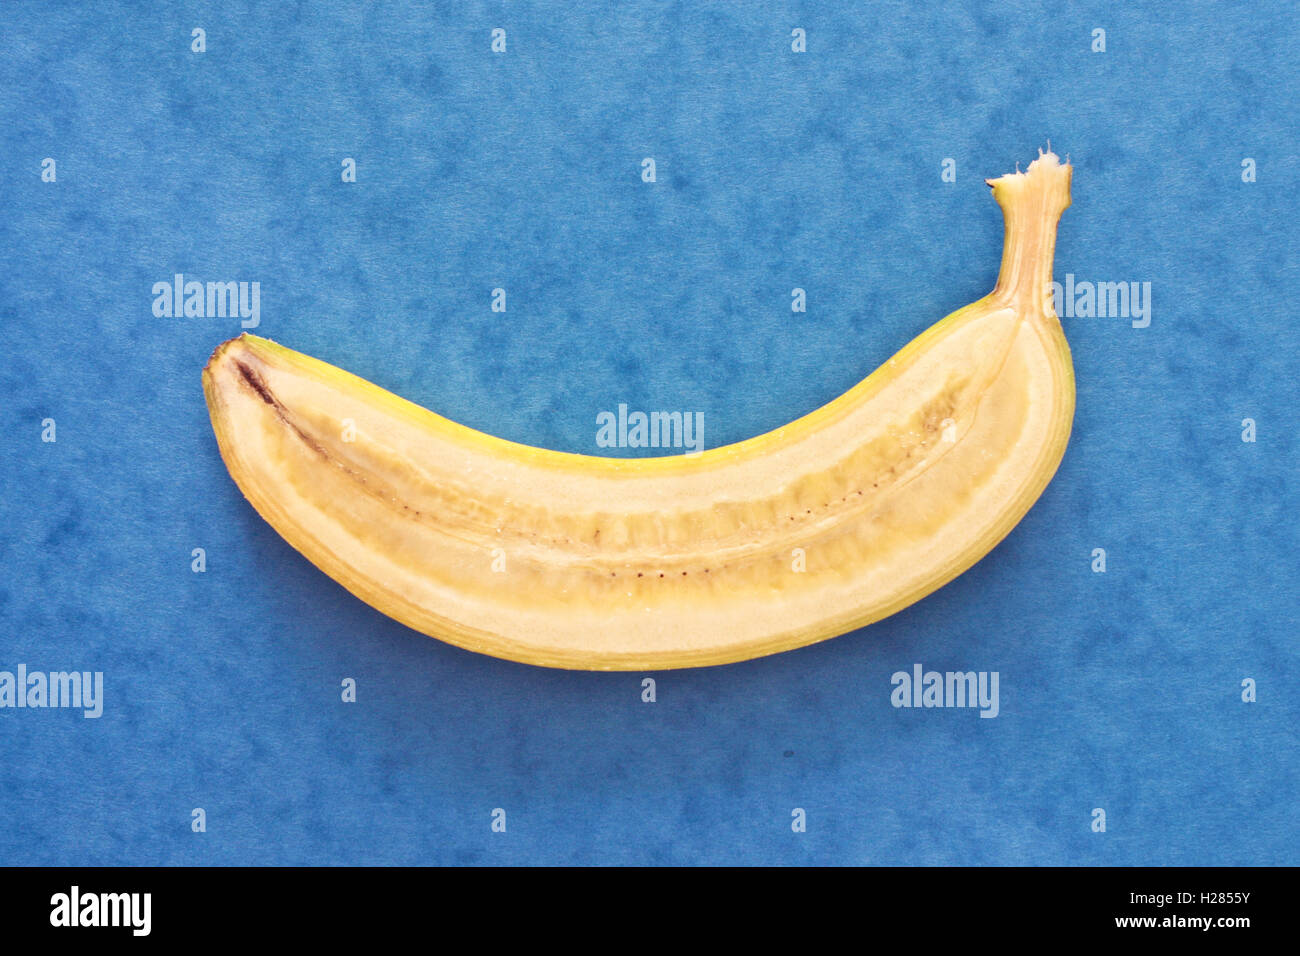 a) Banana bunch; (b) axial view of a banana; (c) lateral view of a